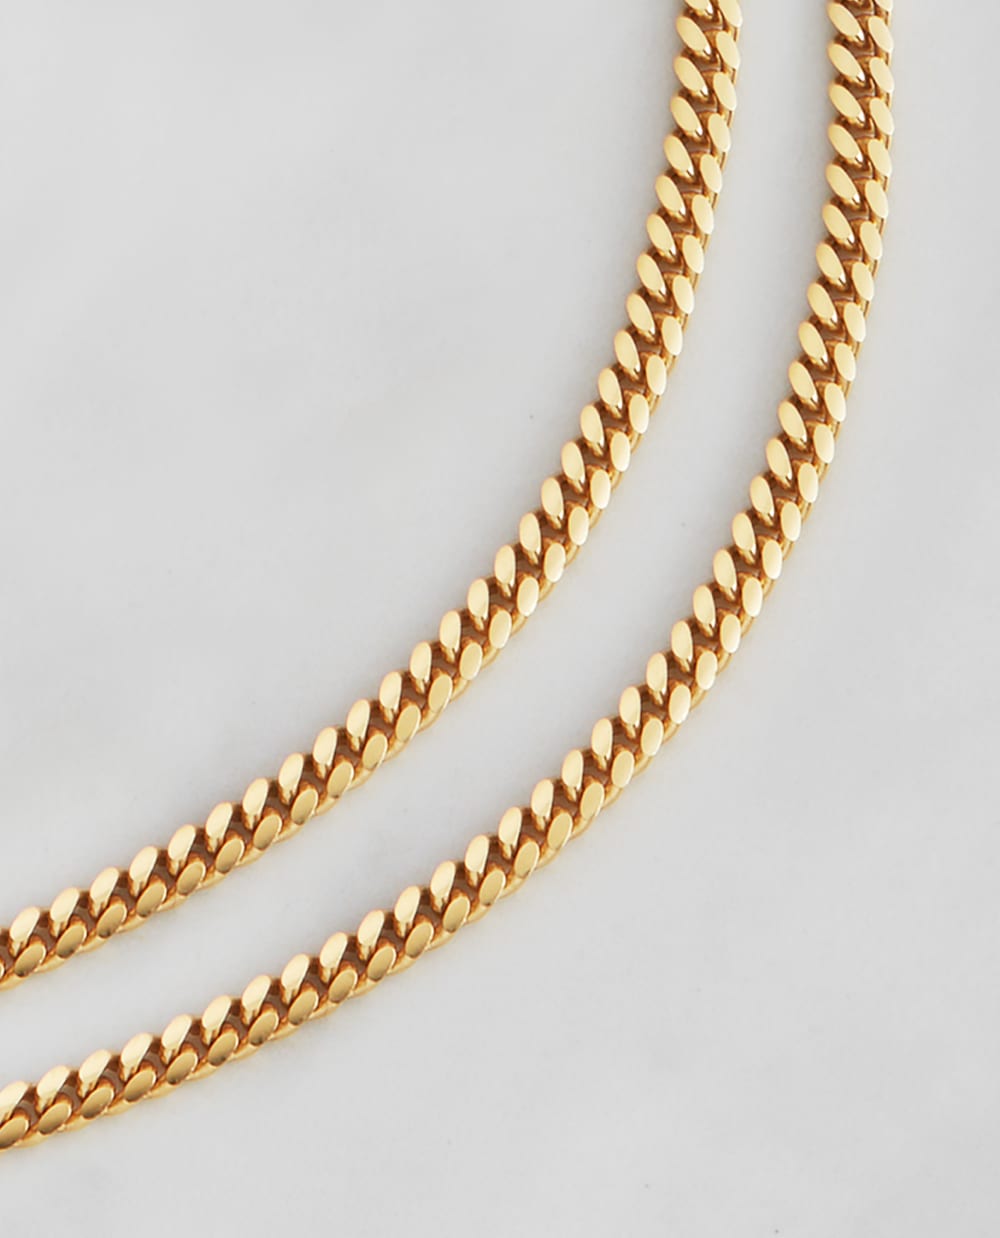 Image Cuban Link Chain - 3mm - Gold - Made With Precious Metals